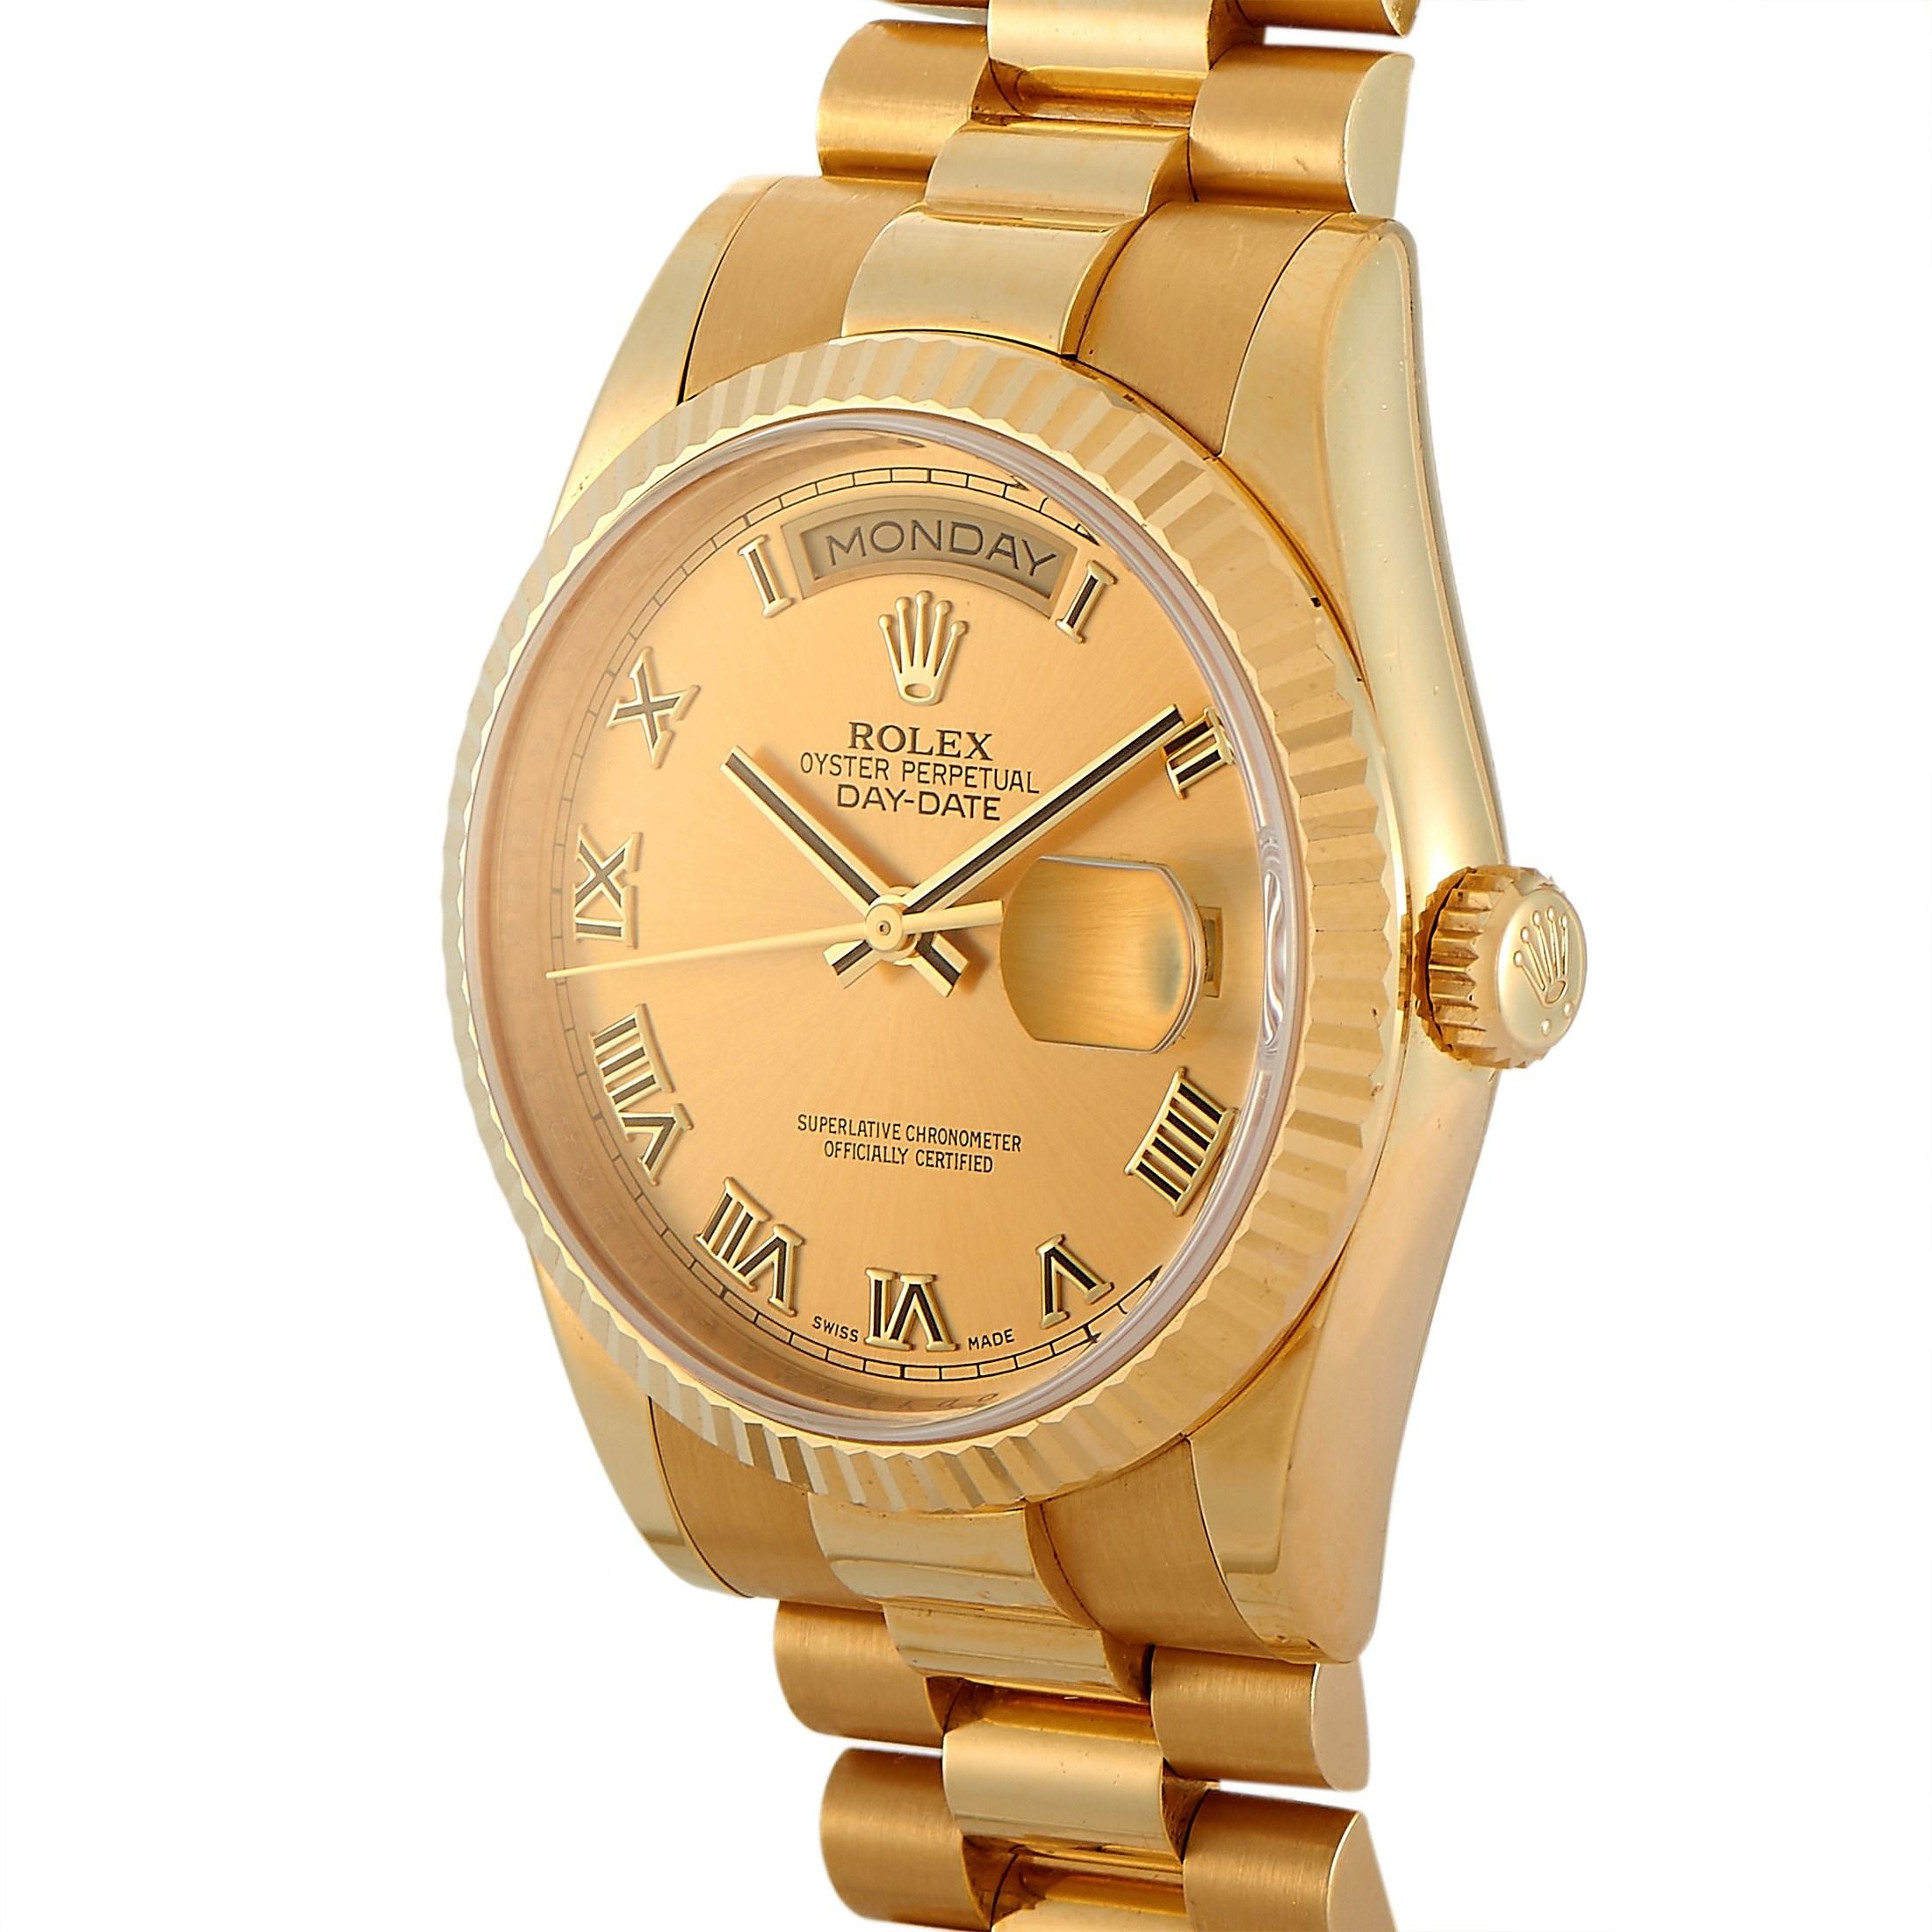 The Rolex Day-Date 18K Yellow Gold President Watch 118238CRP is a statement timepiece that has long been the watch of choice of world leaders, and this particular watch is a rare example of that with the Omani Khanjar symbol engraved on the back of